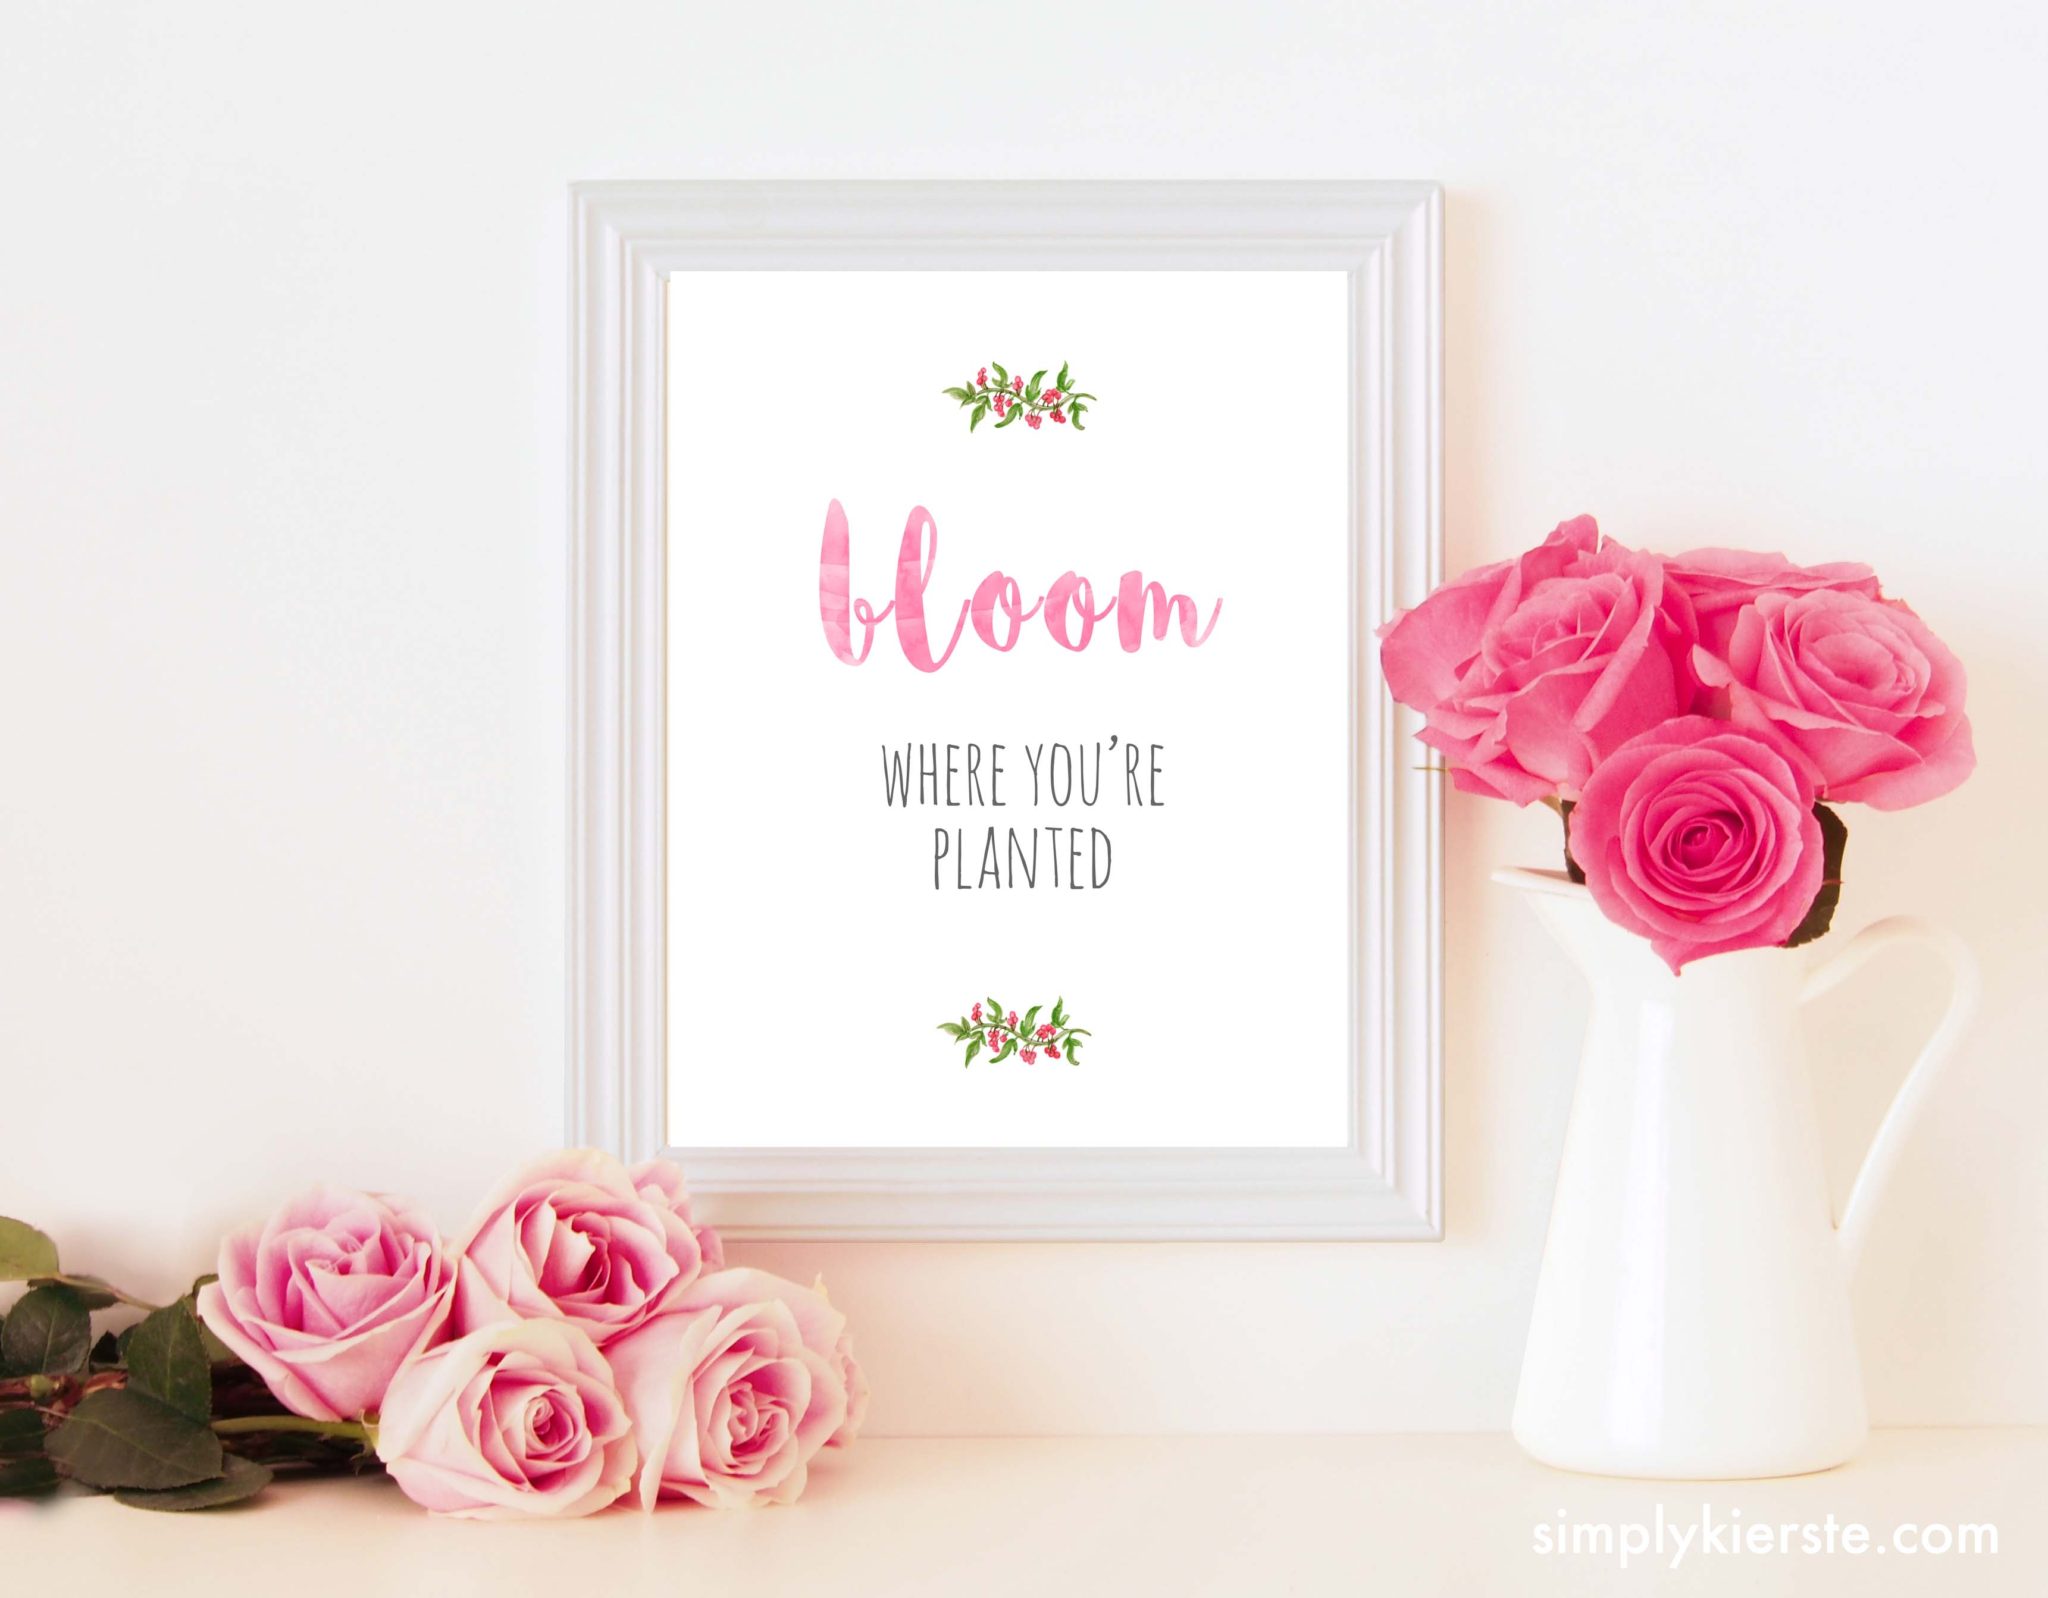 Bloom Where You’re Planted Prints: 5×7, 8×10, 11×14